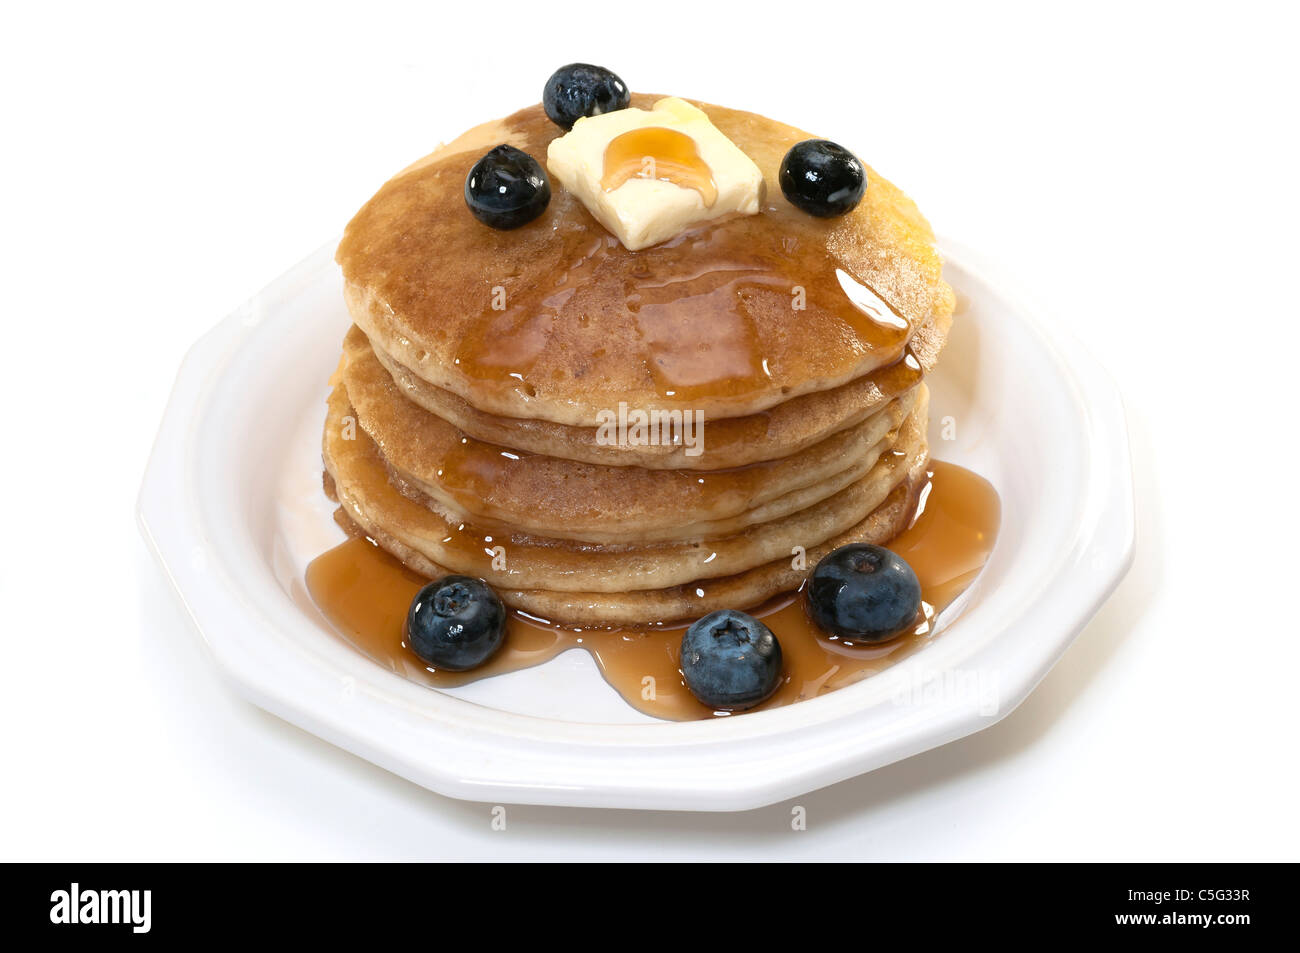 Pancakes with blueberries, syrup, and butter isolated on white background. Stock Photo